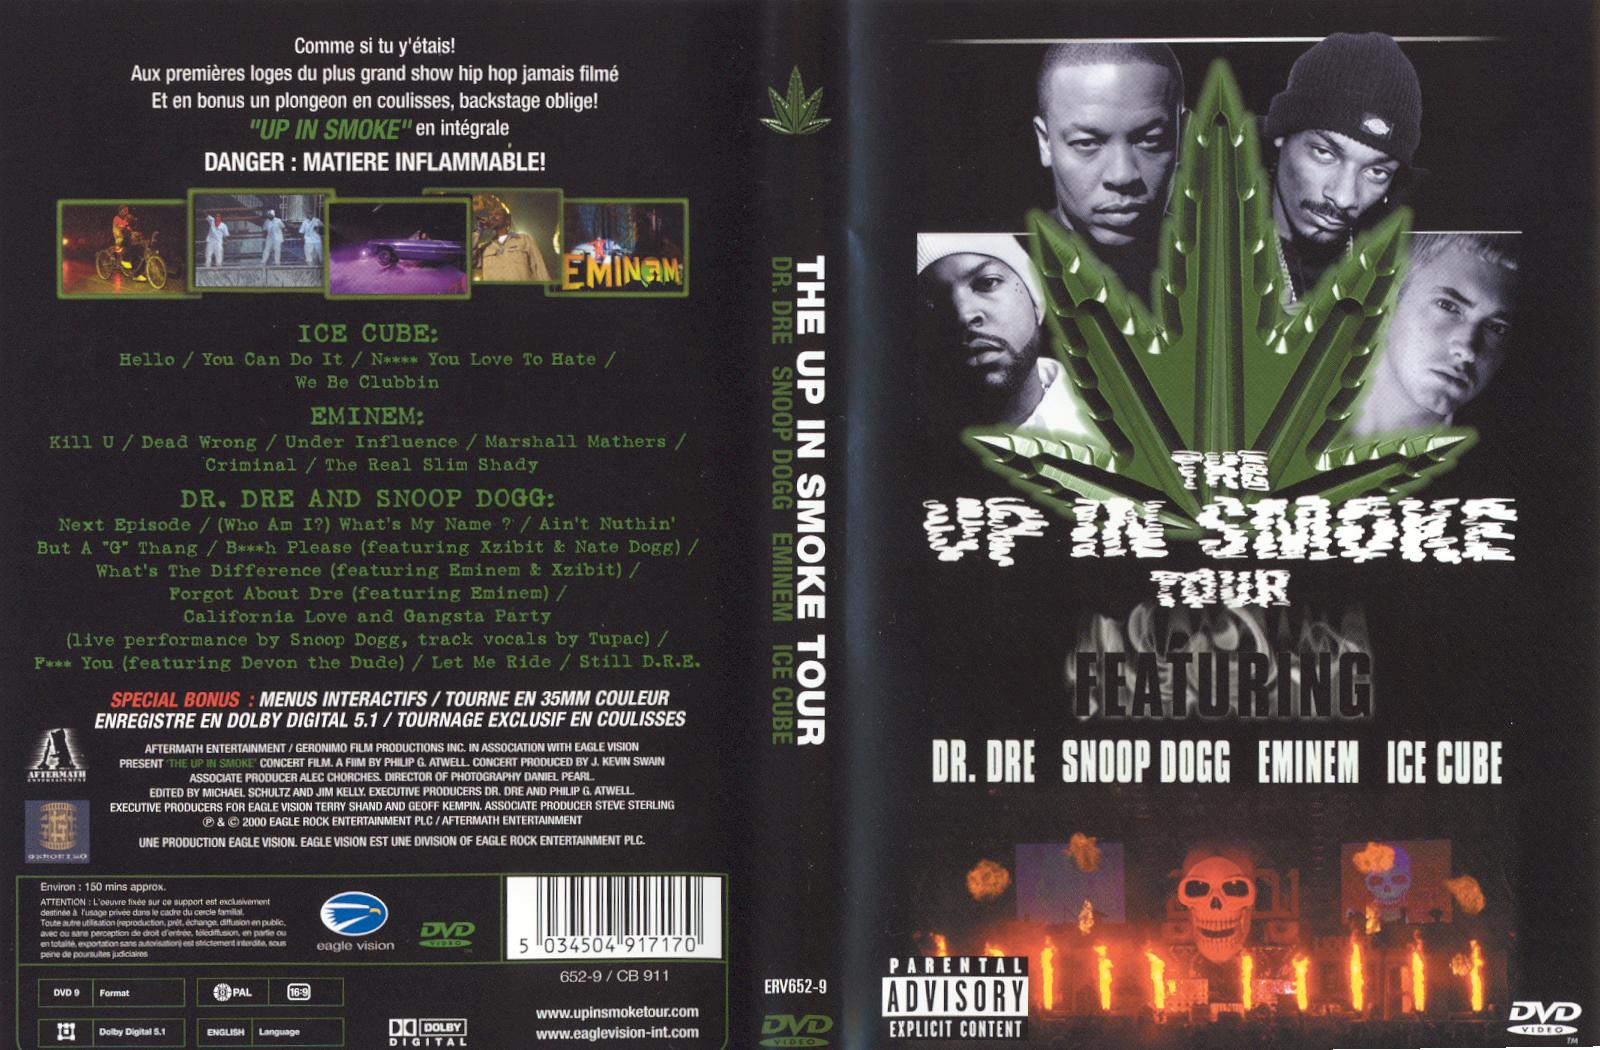 The up in smoke tour (Dr.Dre, Snoop Dogg, Eminem, Ice Cube)